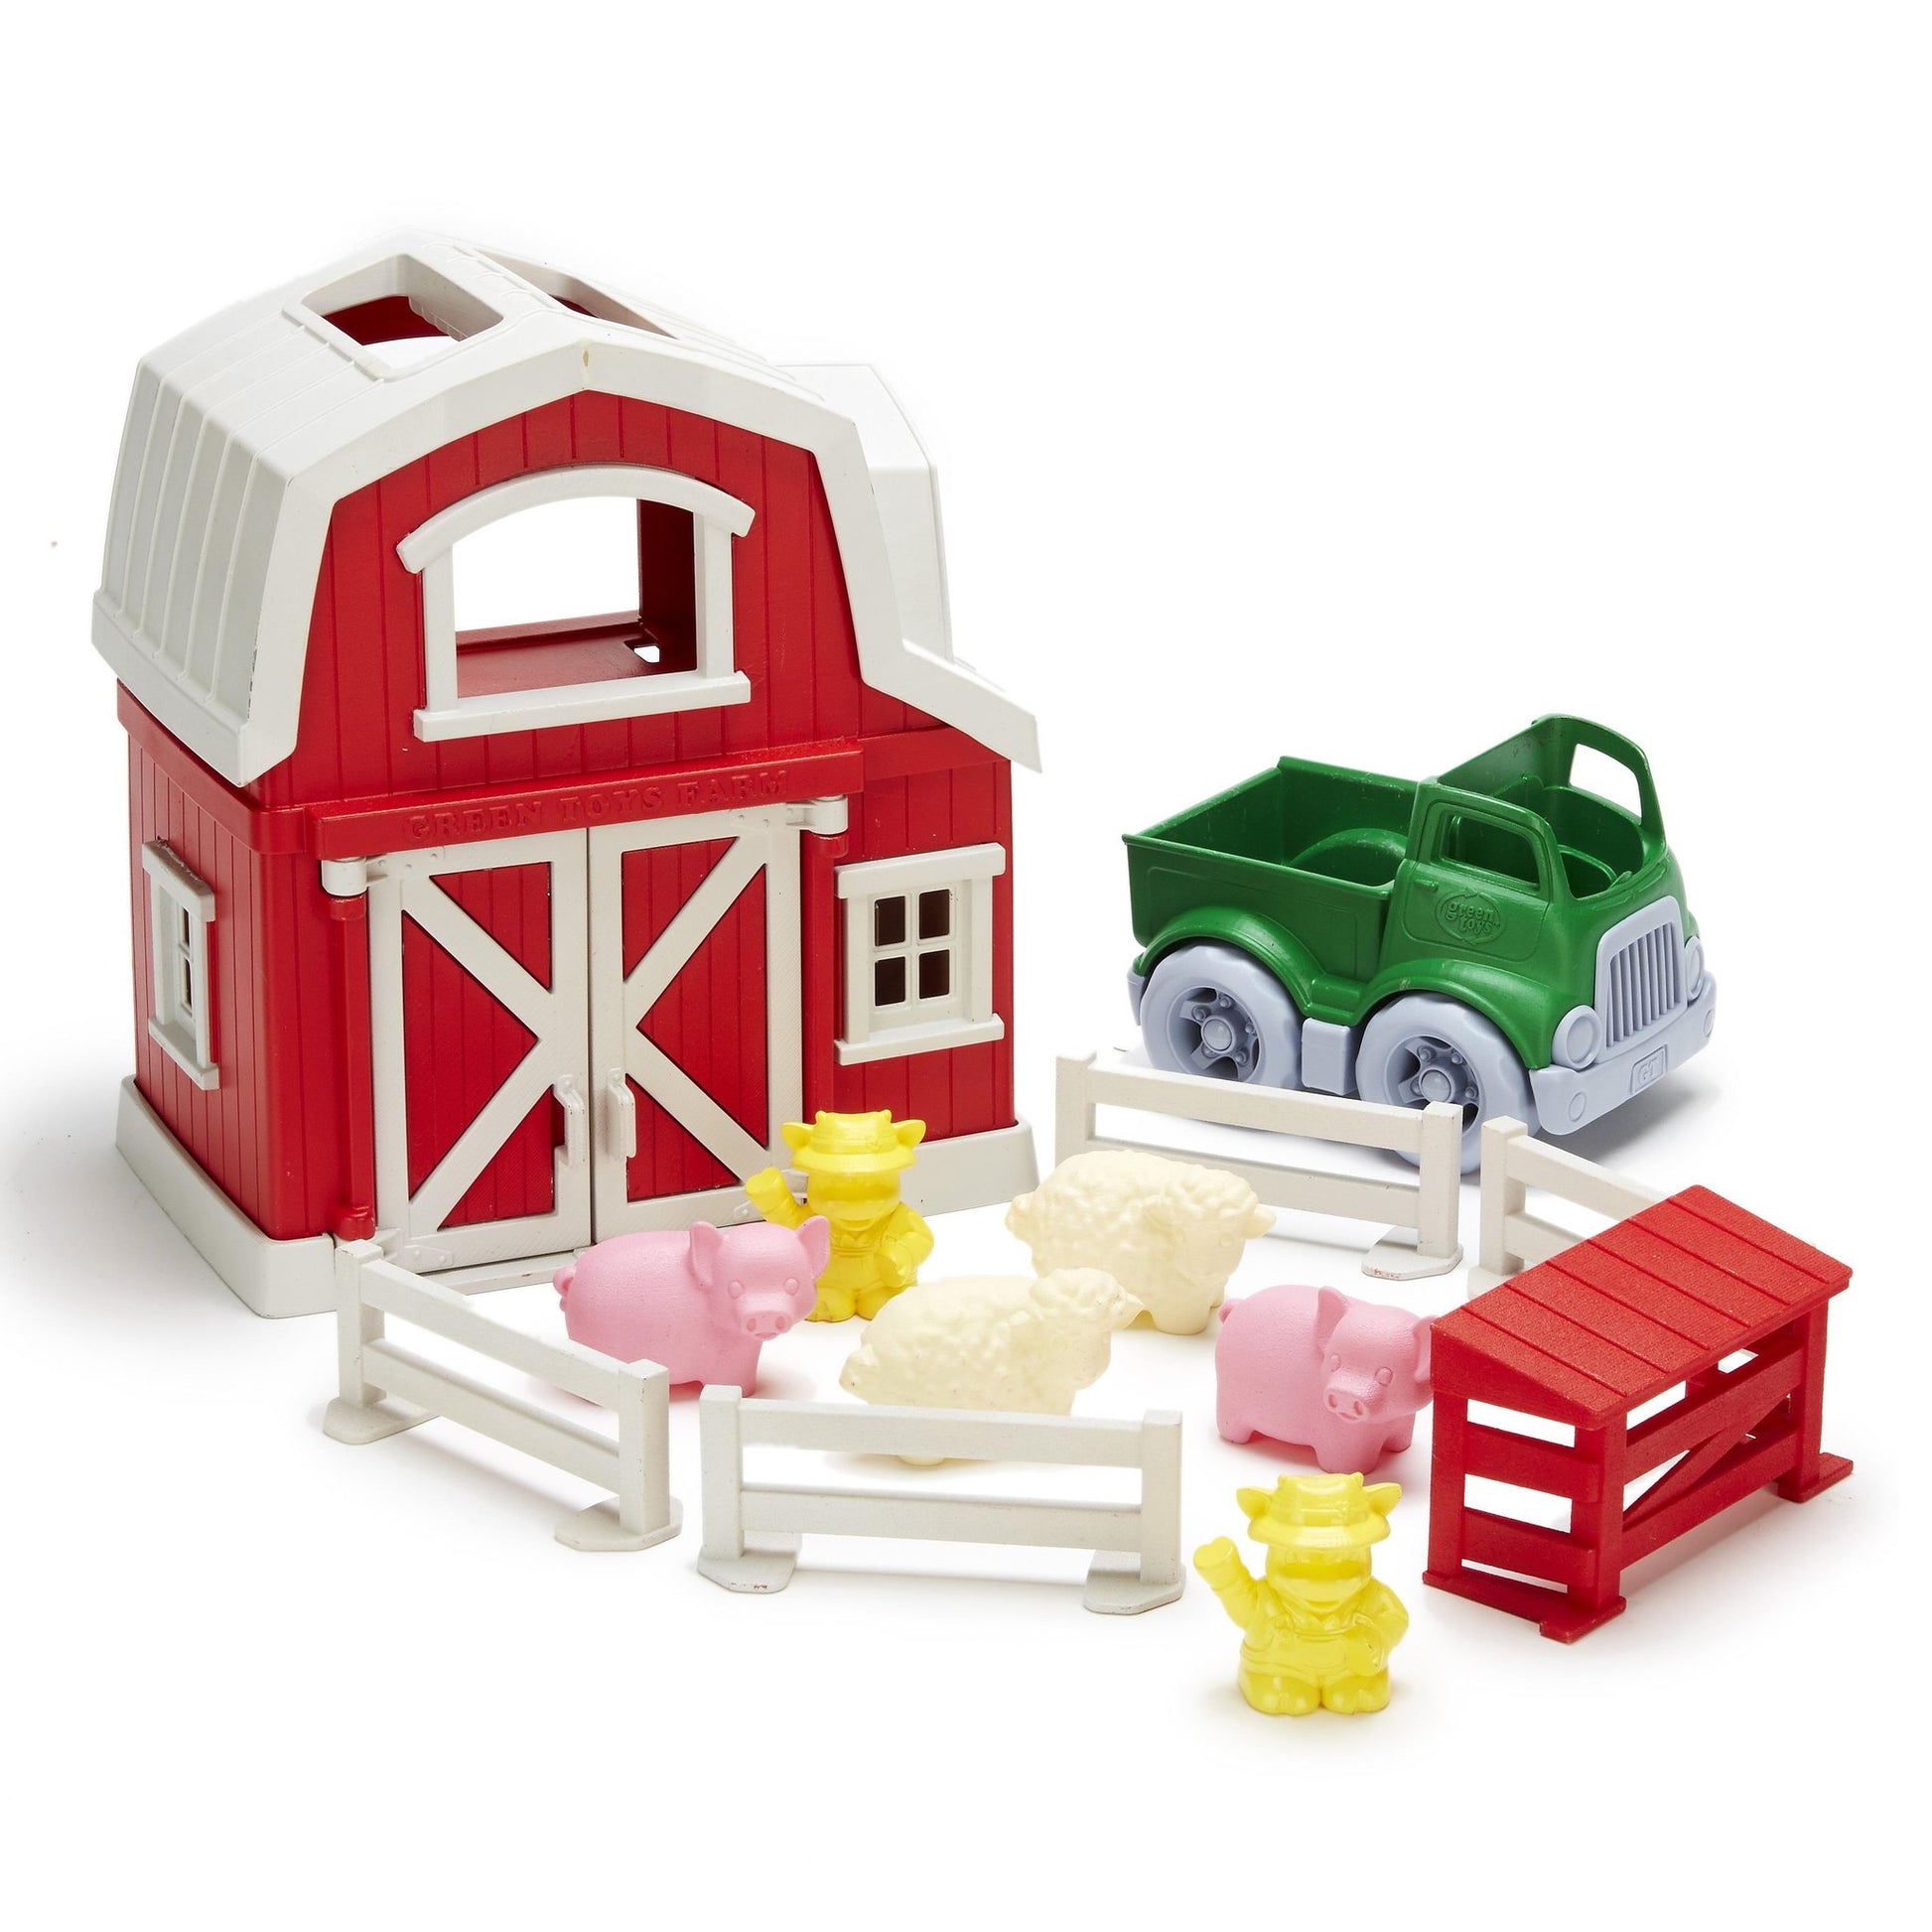 the farm playset displayed on a white background